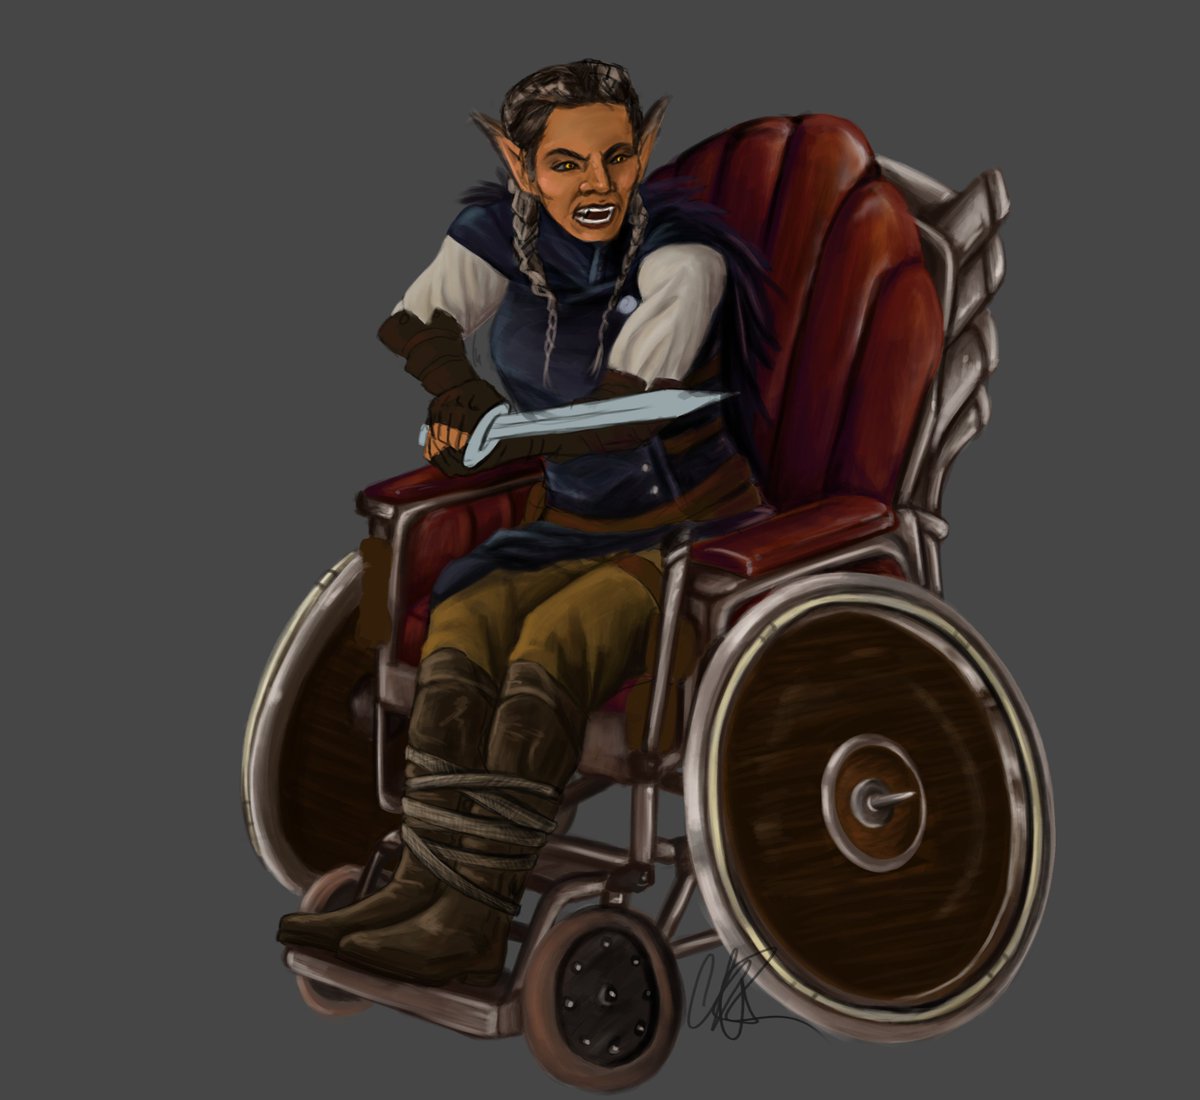 @PandasAndVidya Using hormone injections and getting surgery in a fantasy D&D setting is about as ridiculous as using a battle wheelchair. Two spells later your legs work again and permanently whatever gender you wish to be. You could be the best version of you. Why settle for less?